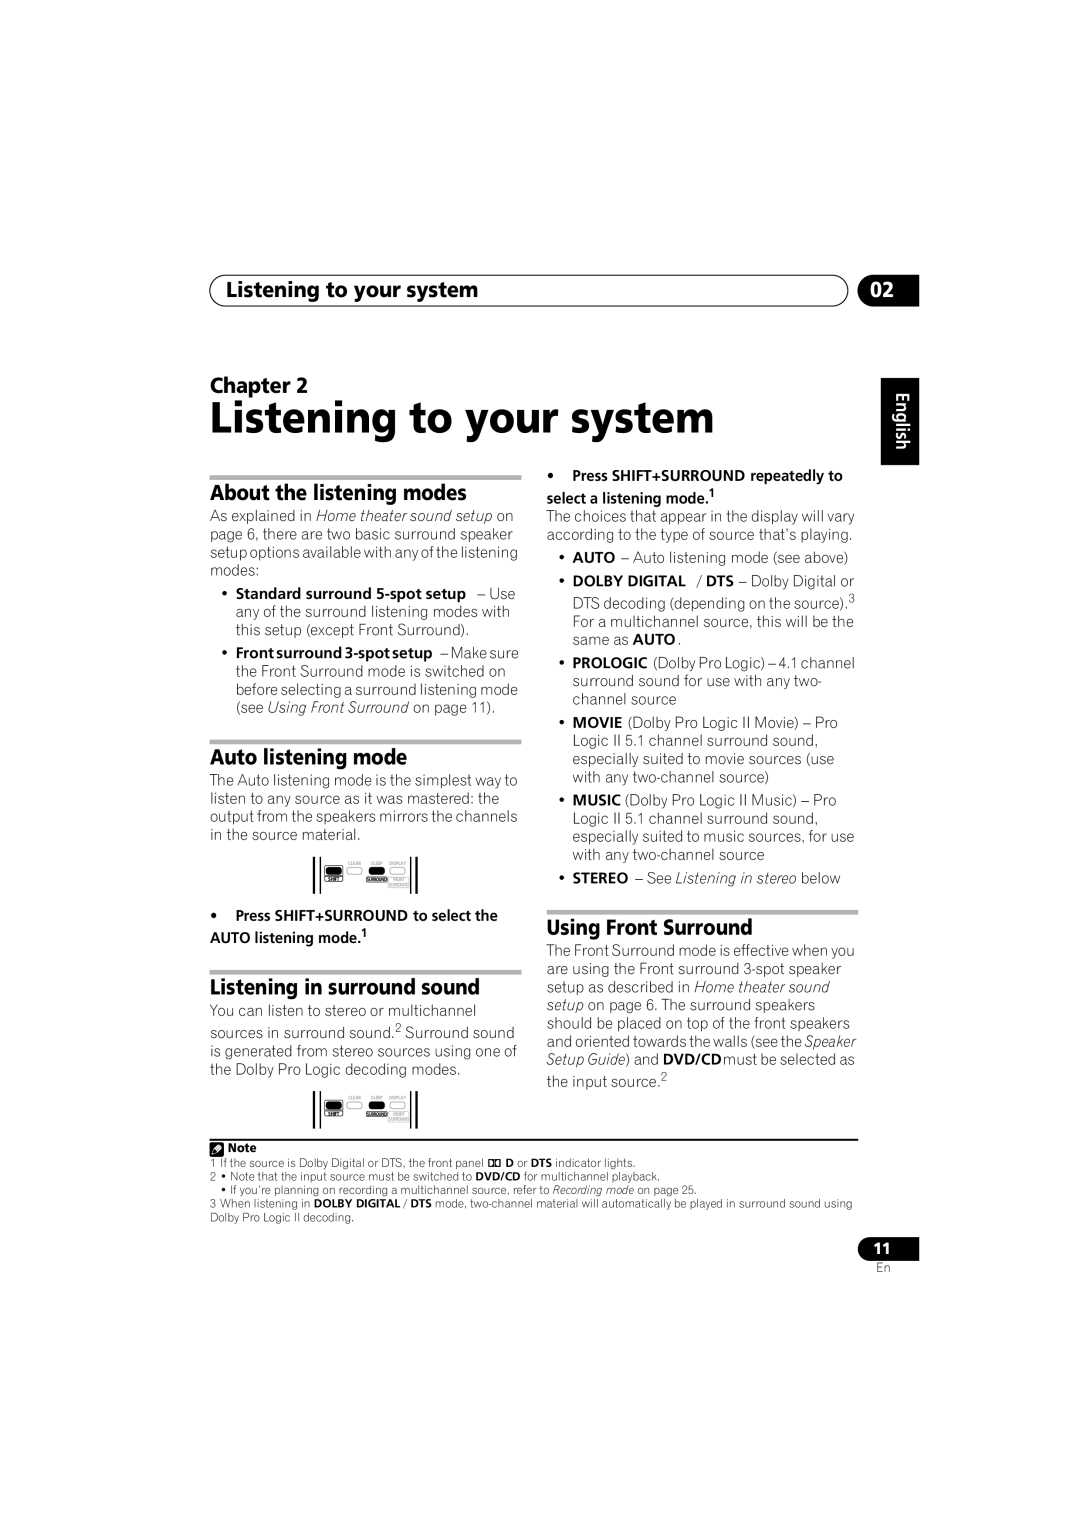 Pioneer S-DV232T, S-DV131 Listening to your system Chapter, About the listening modes, Auto listening mode, English 